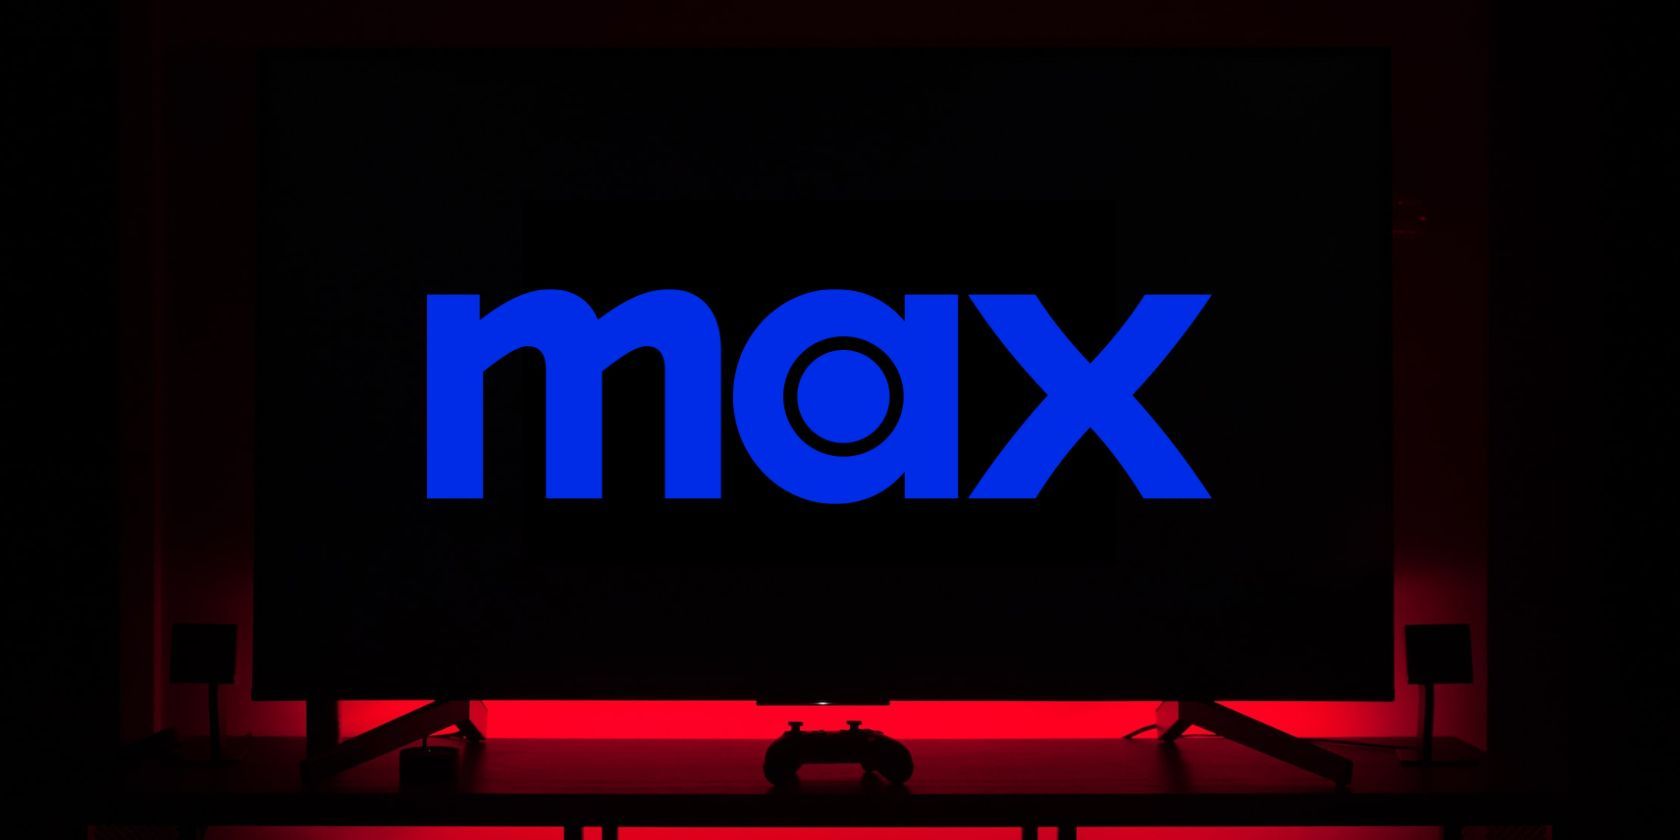 hbo max logo on tv screen with red backlight